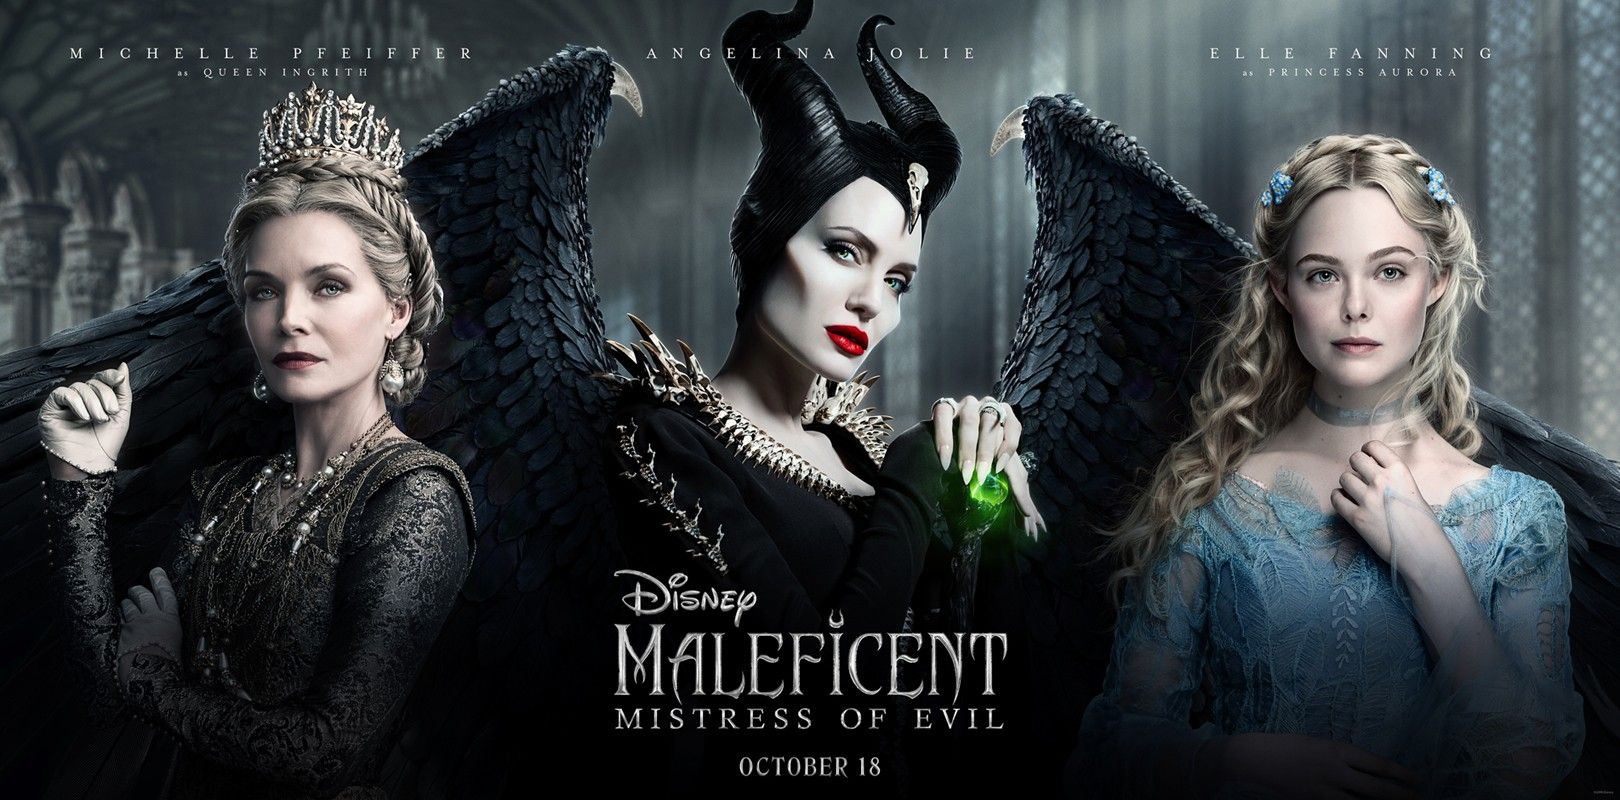 Maleficent Mistress of Evil Triptych poster